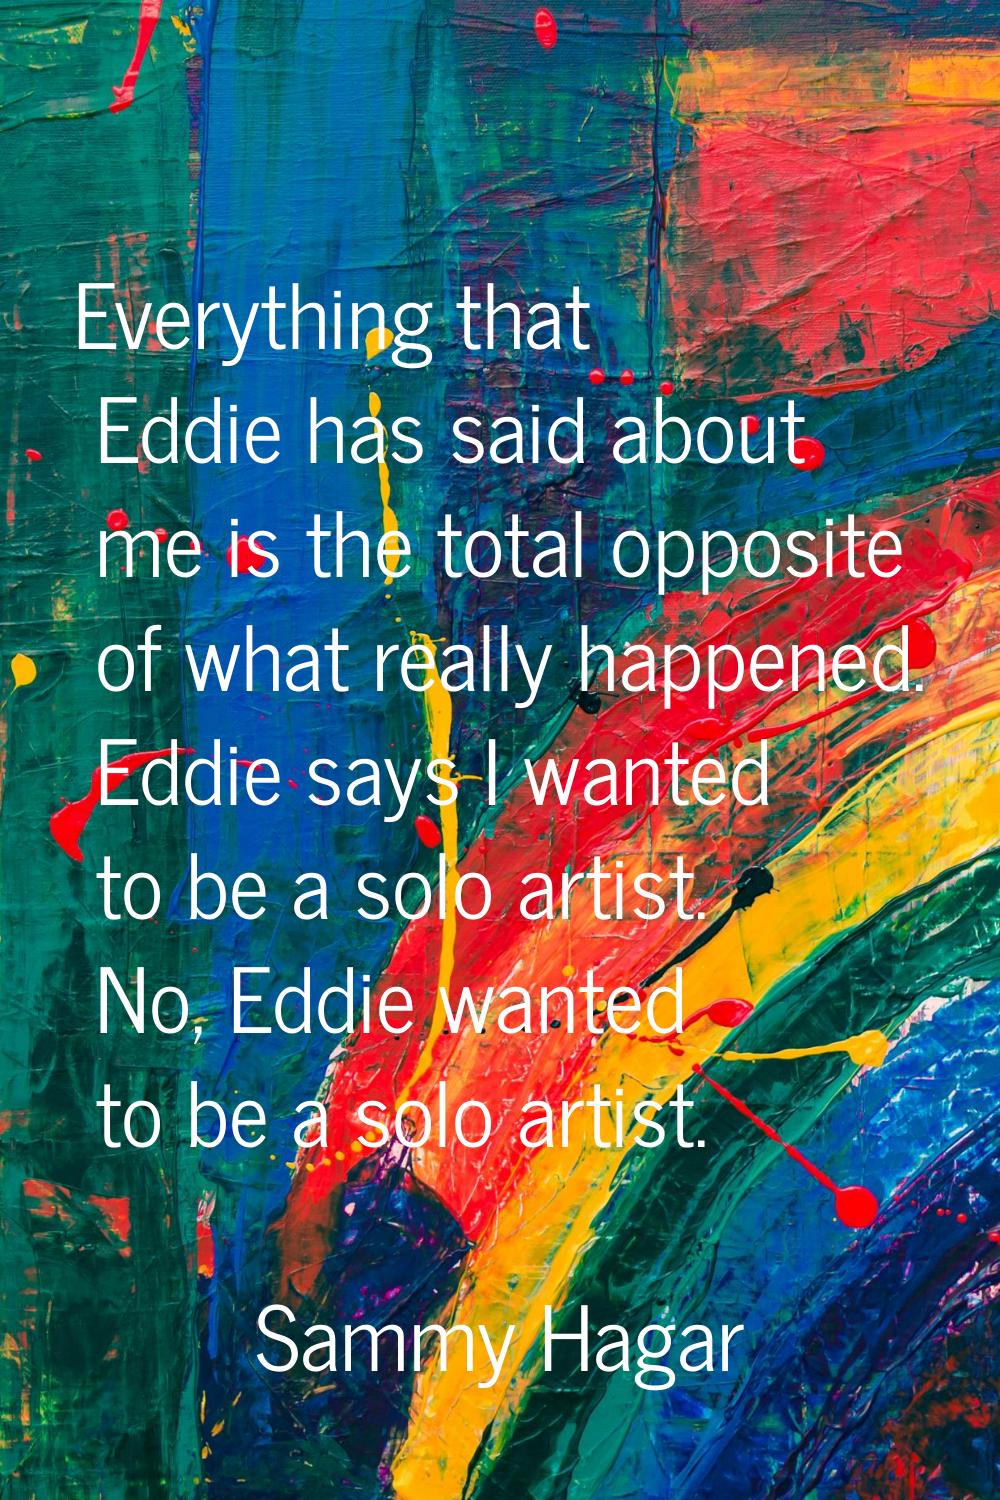 Everything that Eddie has said about me is the total opposite of what really happened. Eddie says I